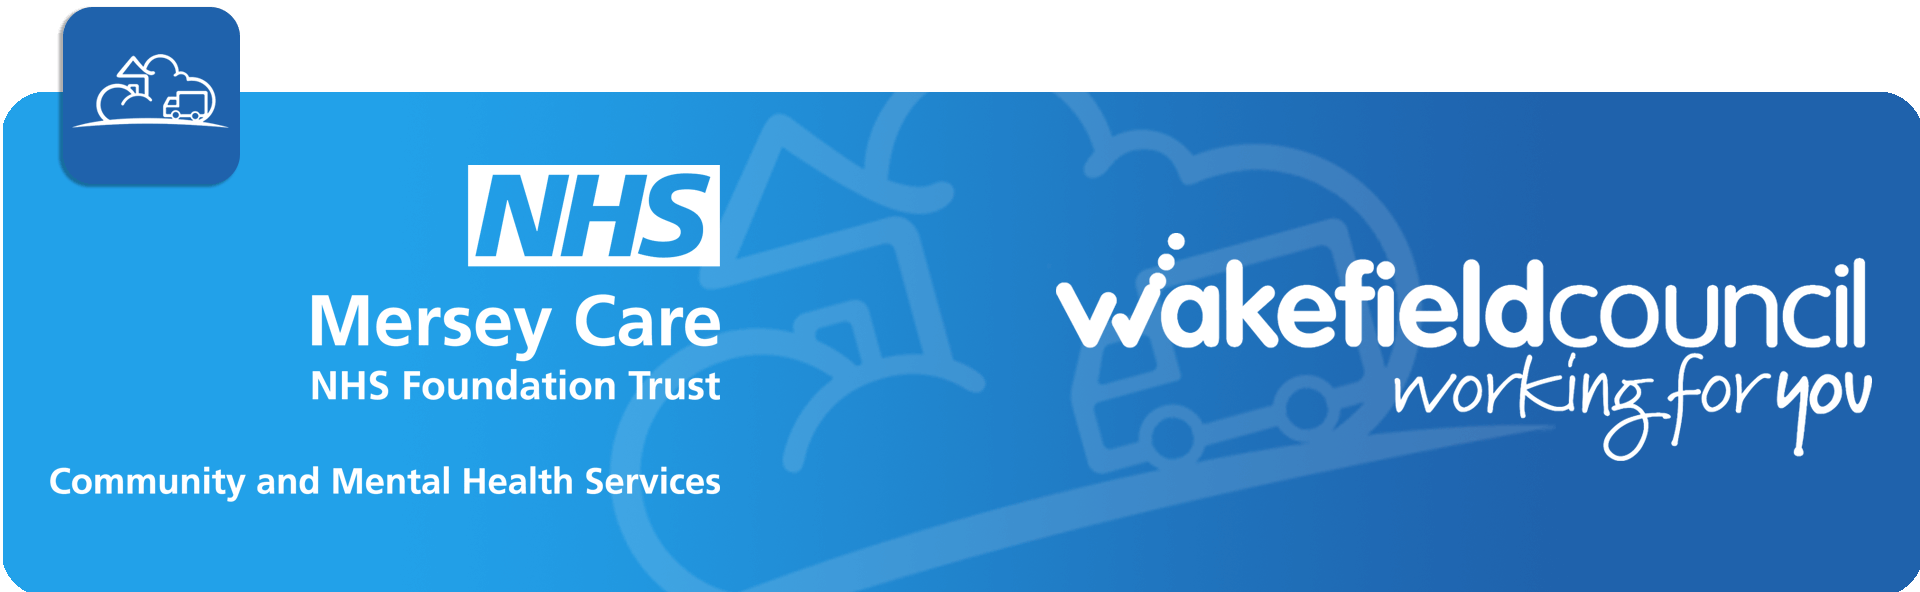 NHS mersey care and wakefield council logos